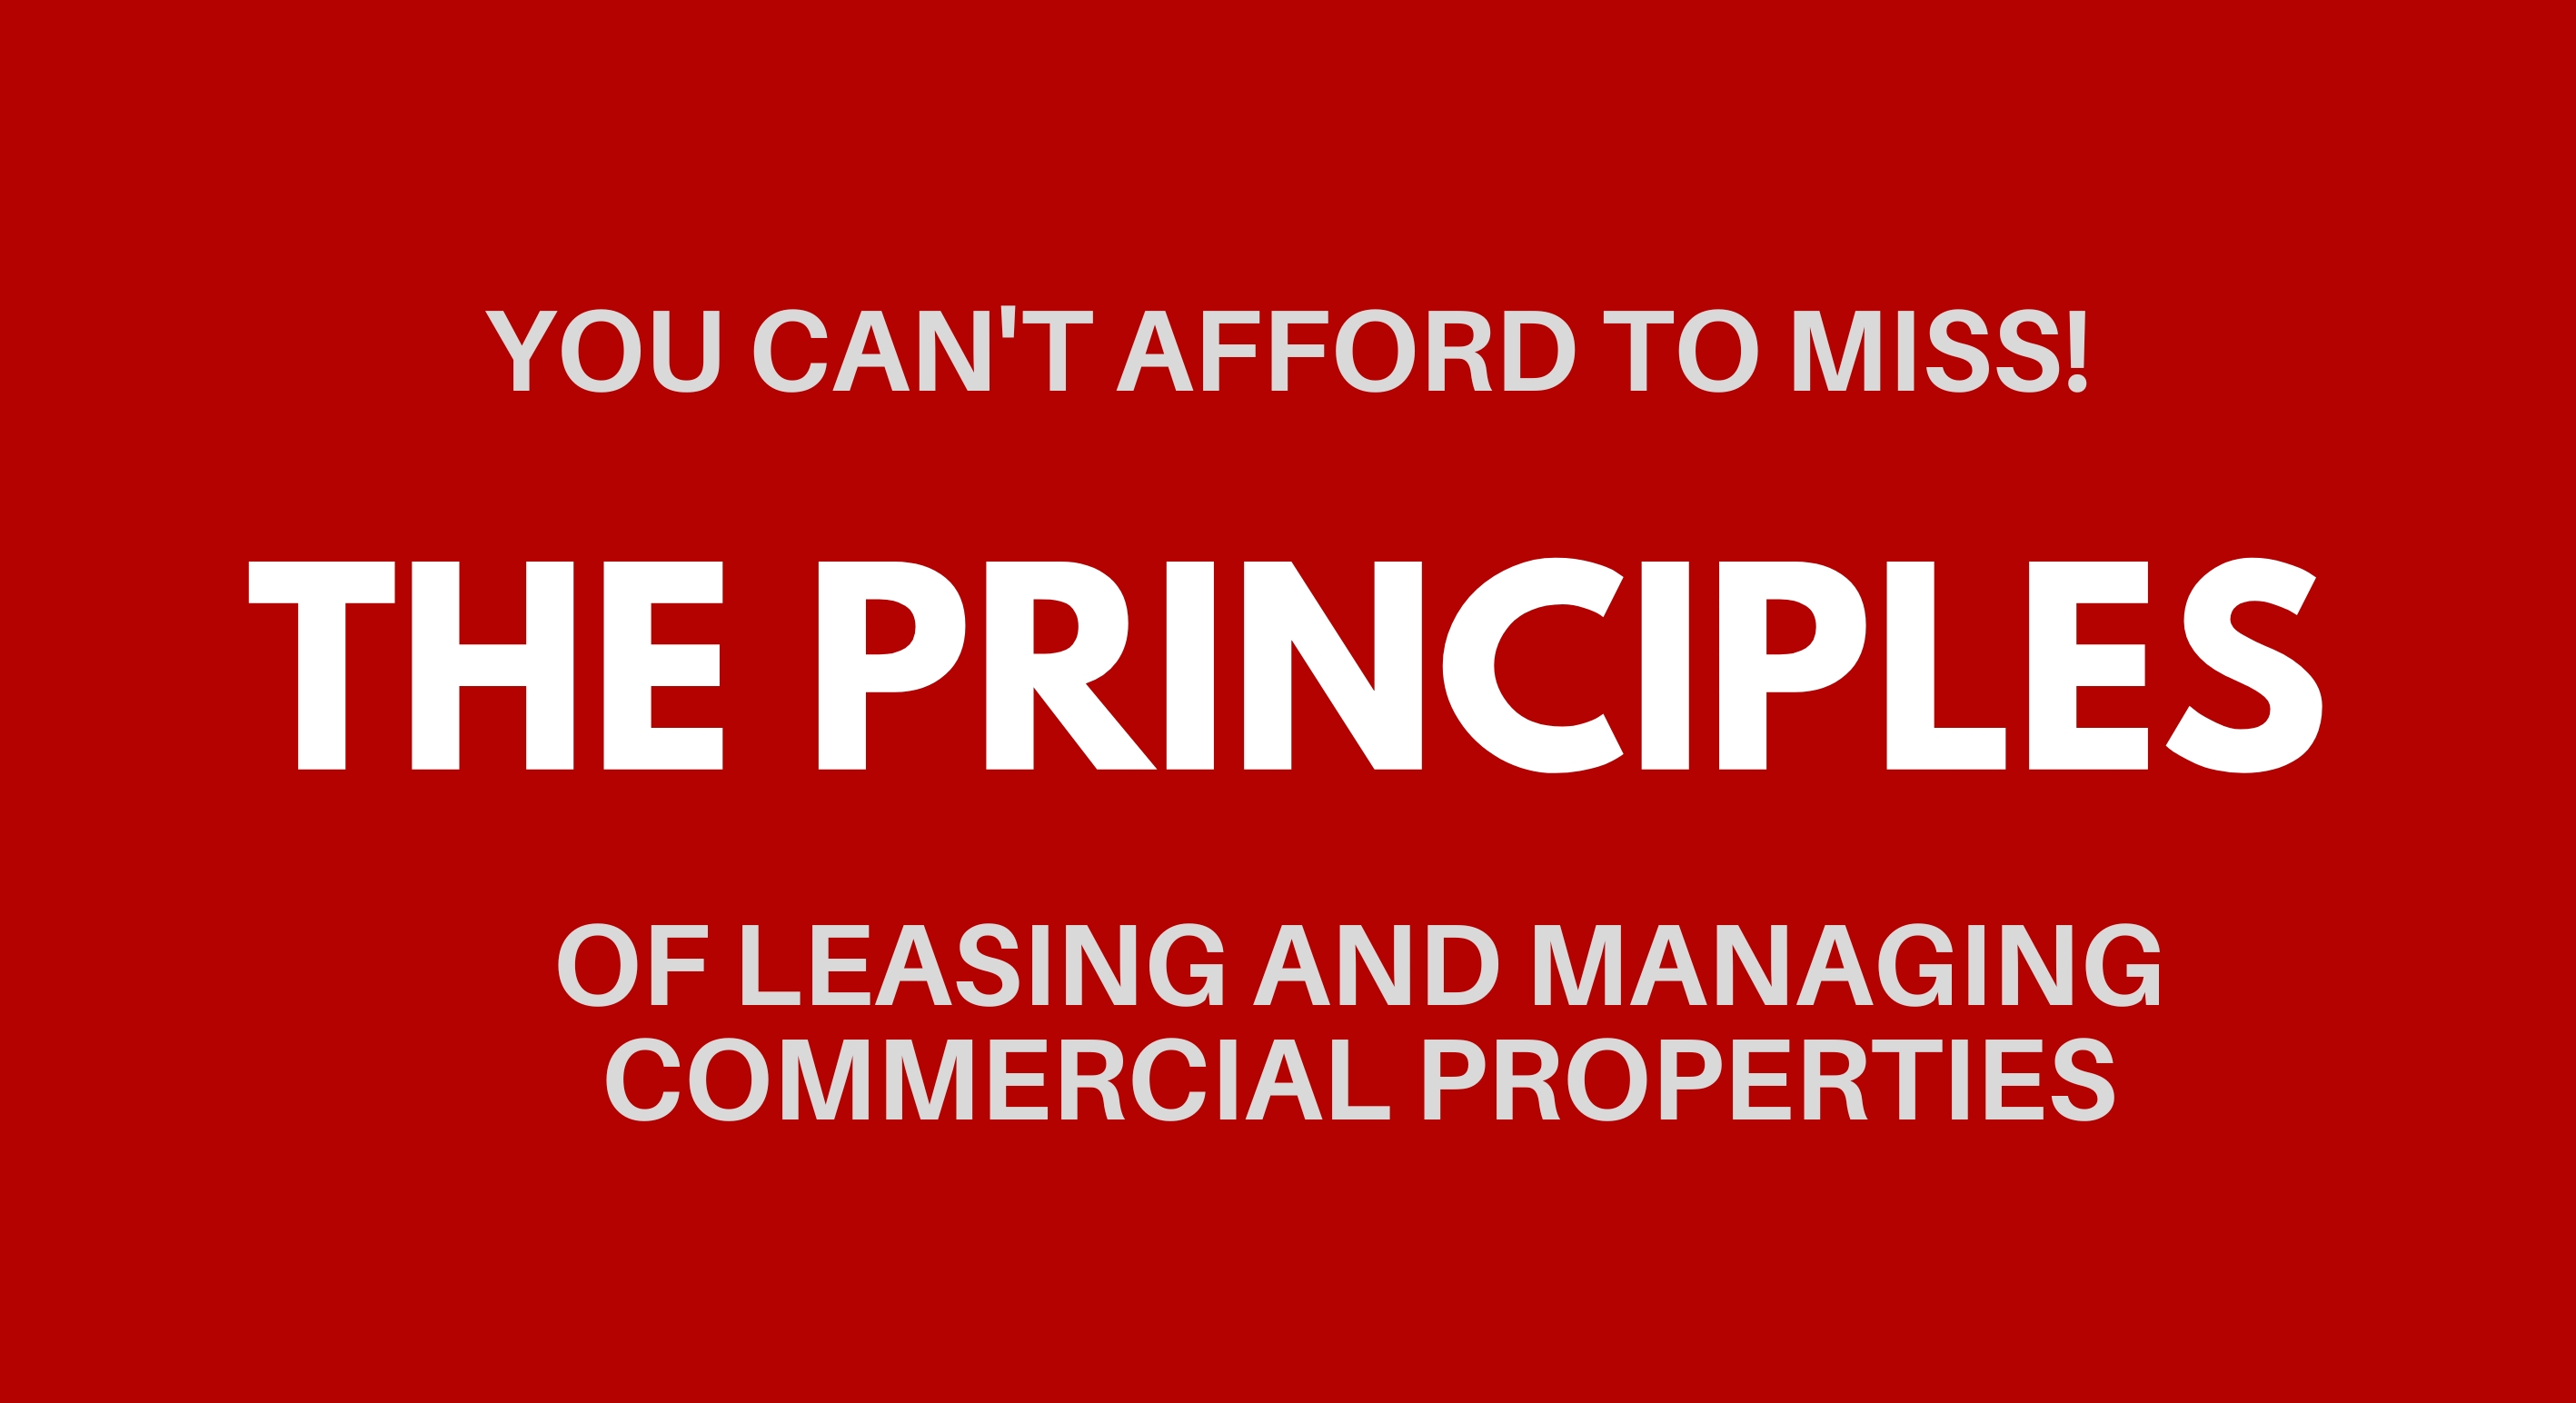 Principles of leasing and managing commercial properties